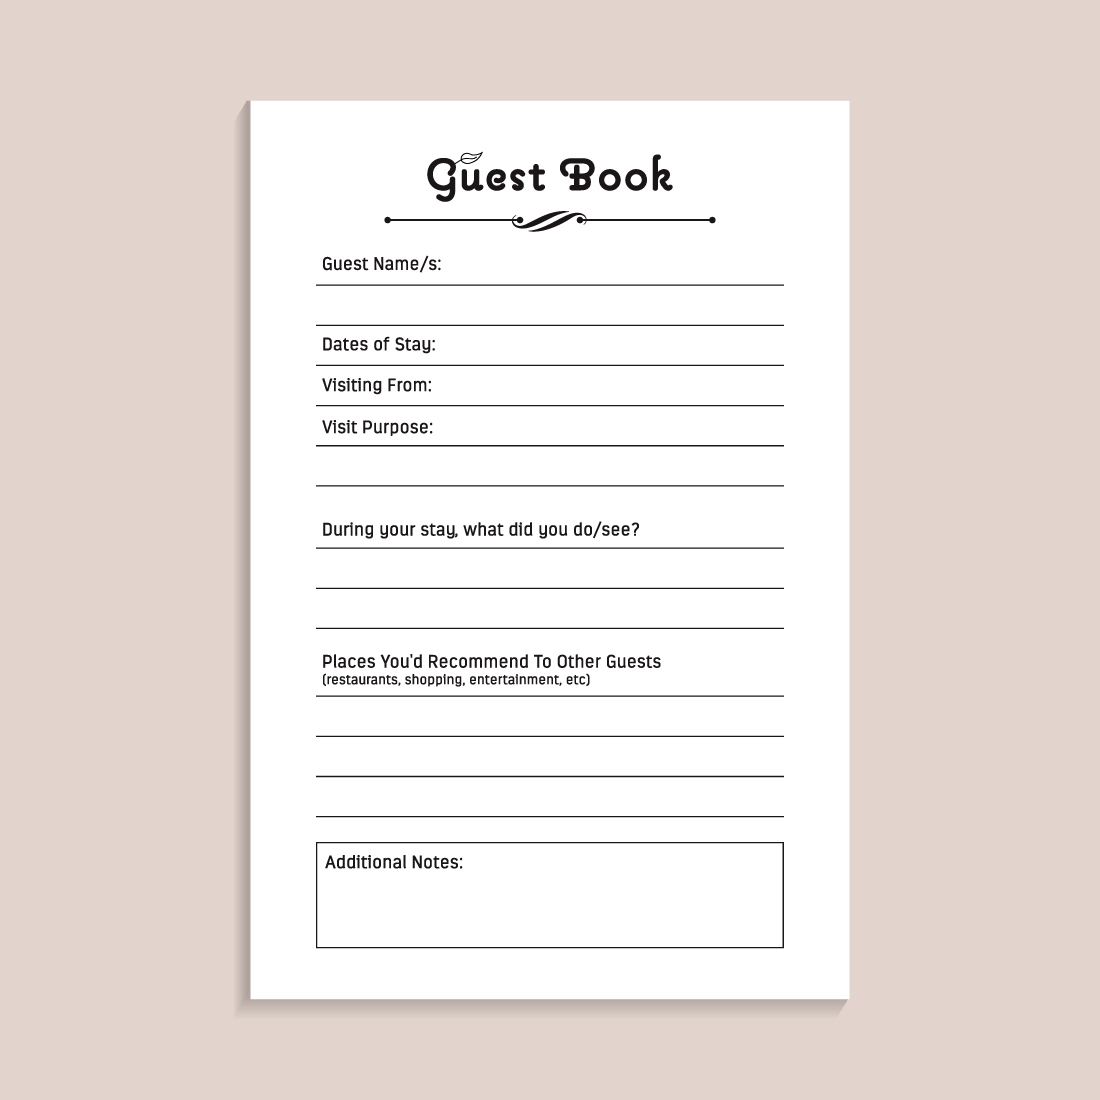 Blood Cabin Guest Book KDP Interior cover